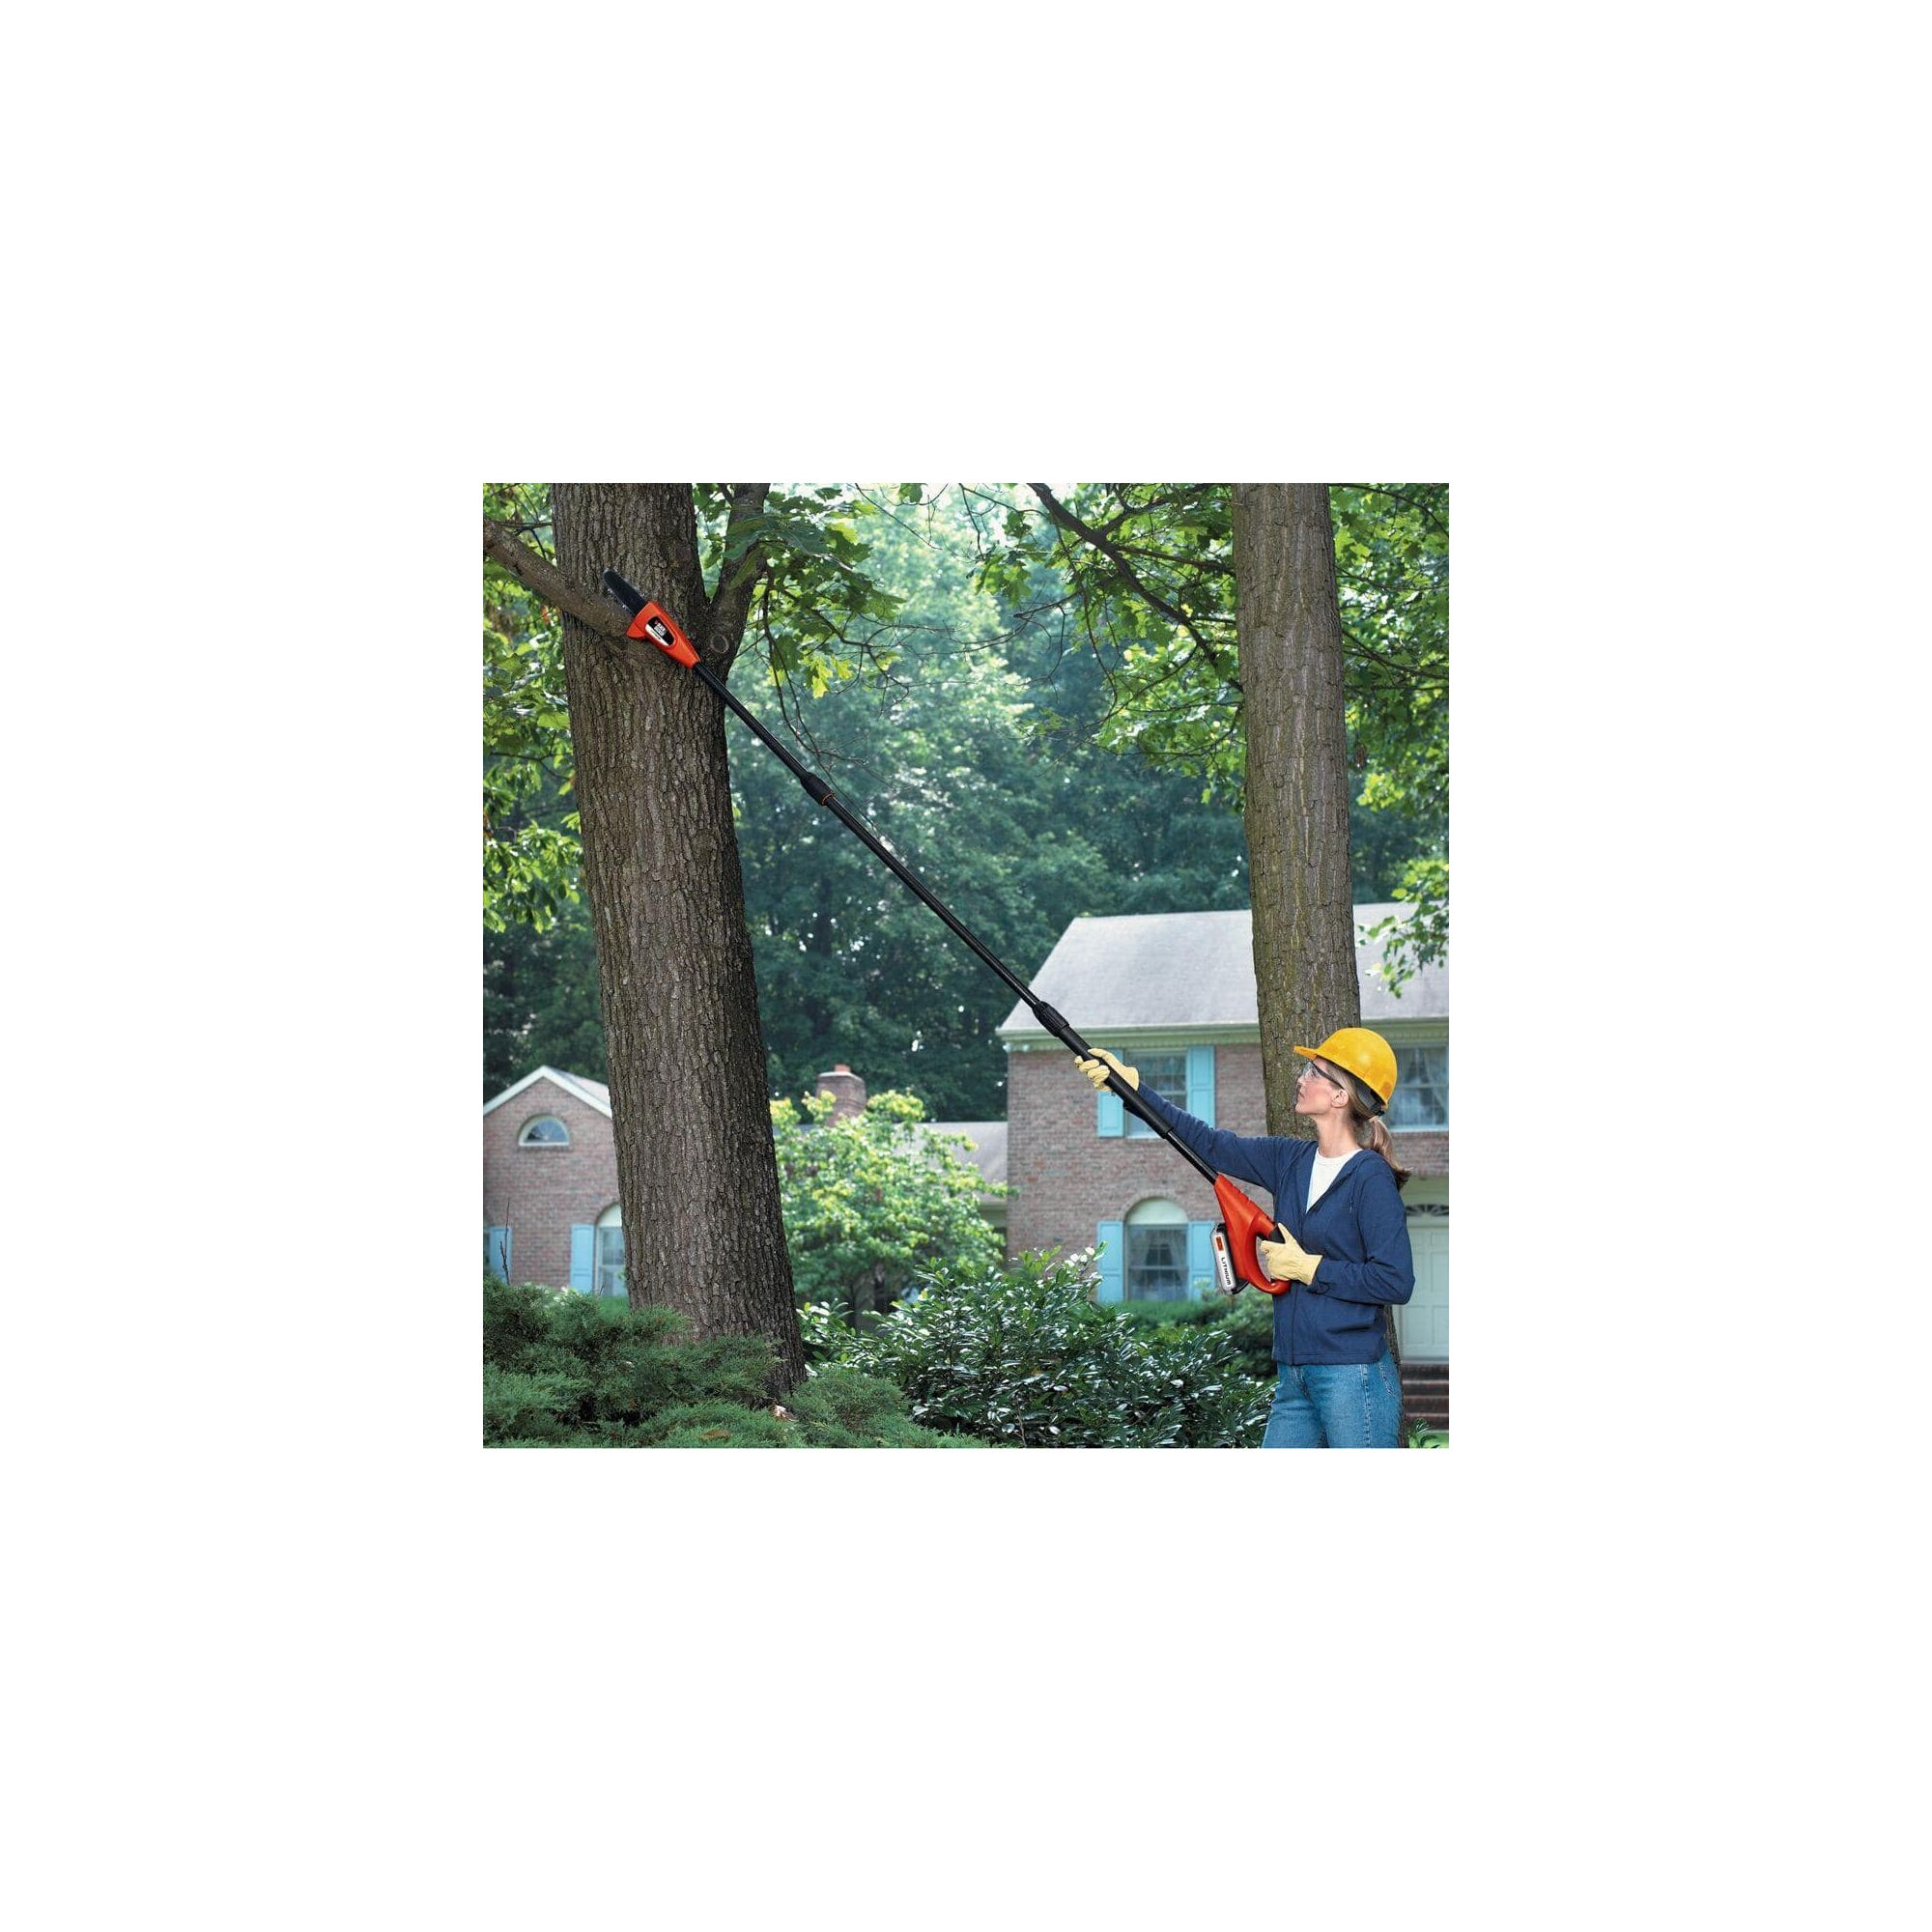 Lithium pole pruning saw being used to cut branches from a tree.